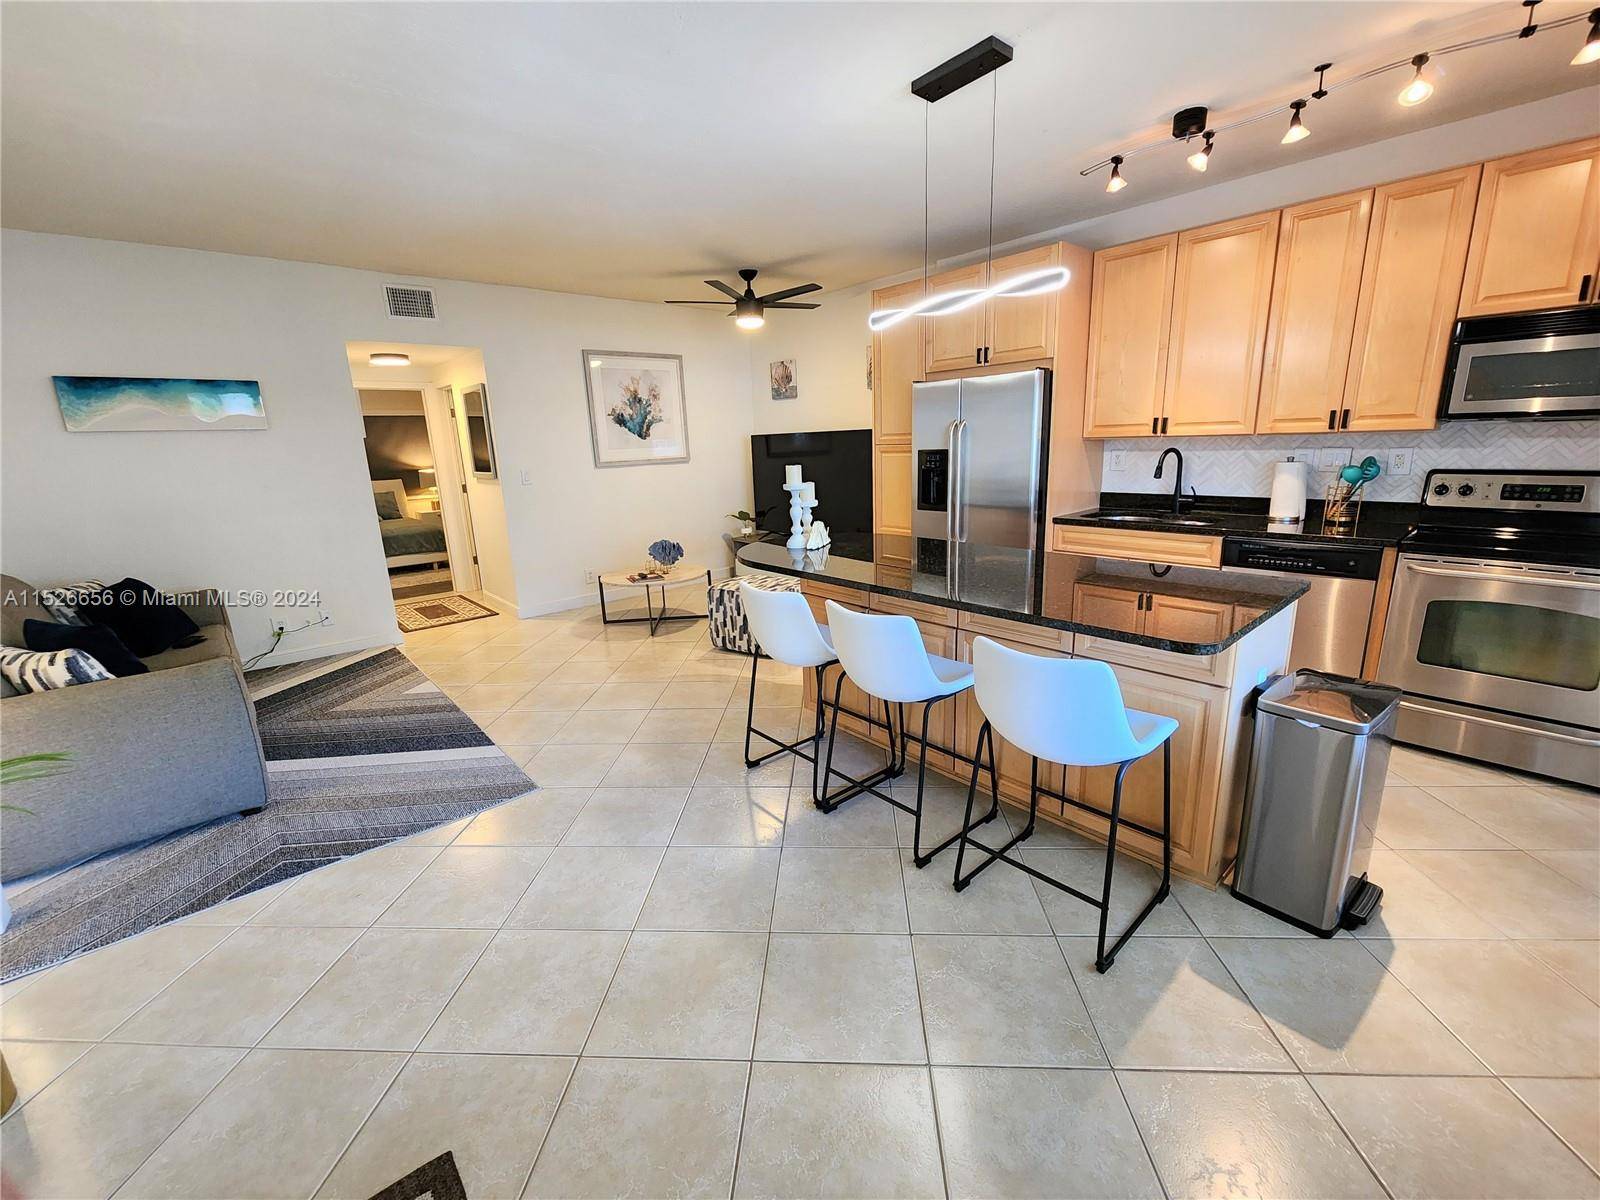 Investor's dream unit located 5 minutes' walk from the famous Fort Lauderdale beaches, fully furnished unit with intracoastal views, beautiful 1 bed 1 bath with eat in island with an ...